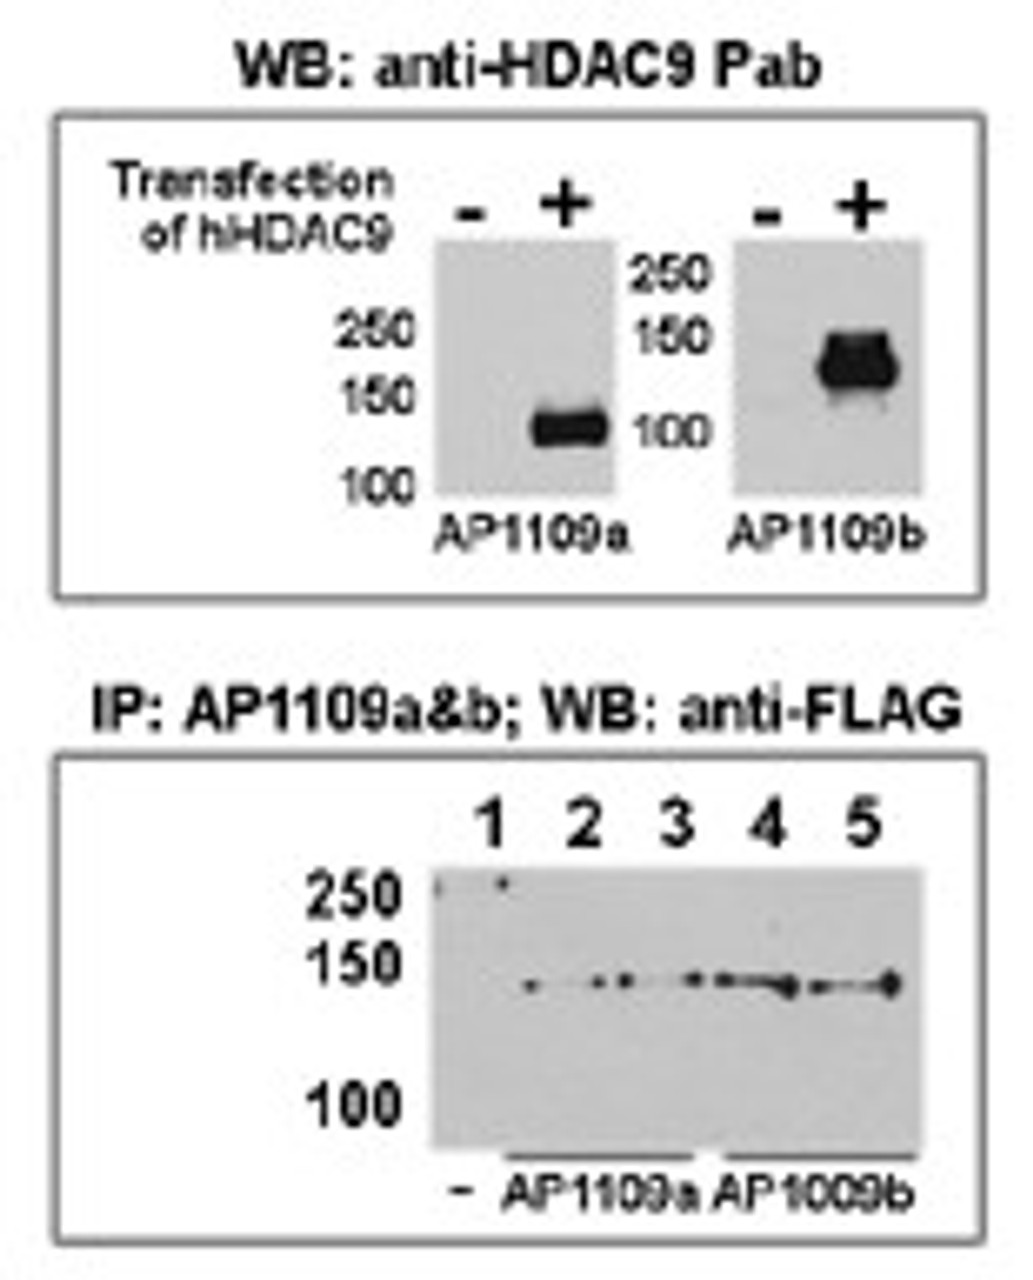 Both anti-HDAC9 N-term and C-term Pab were tested by WB and IP-WB using HeLa and HeLa-HDAC9 transfected cells. Top figure shows both Pab specifically detect HDAC9 in HeLa-HDAC9 transfected cell but not HeLa alone. Bottom figure shows that both Pab can immunoprecipitate (IP) HDAC9 from HeLa-HDAC9 tranfected cells. (Data kindly provided by Dr. Zhigang Yuan, H. Lee Moffitt Cancer Center and Research Institute, Tampa, FL) .